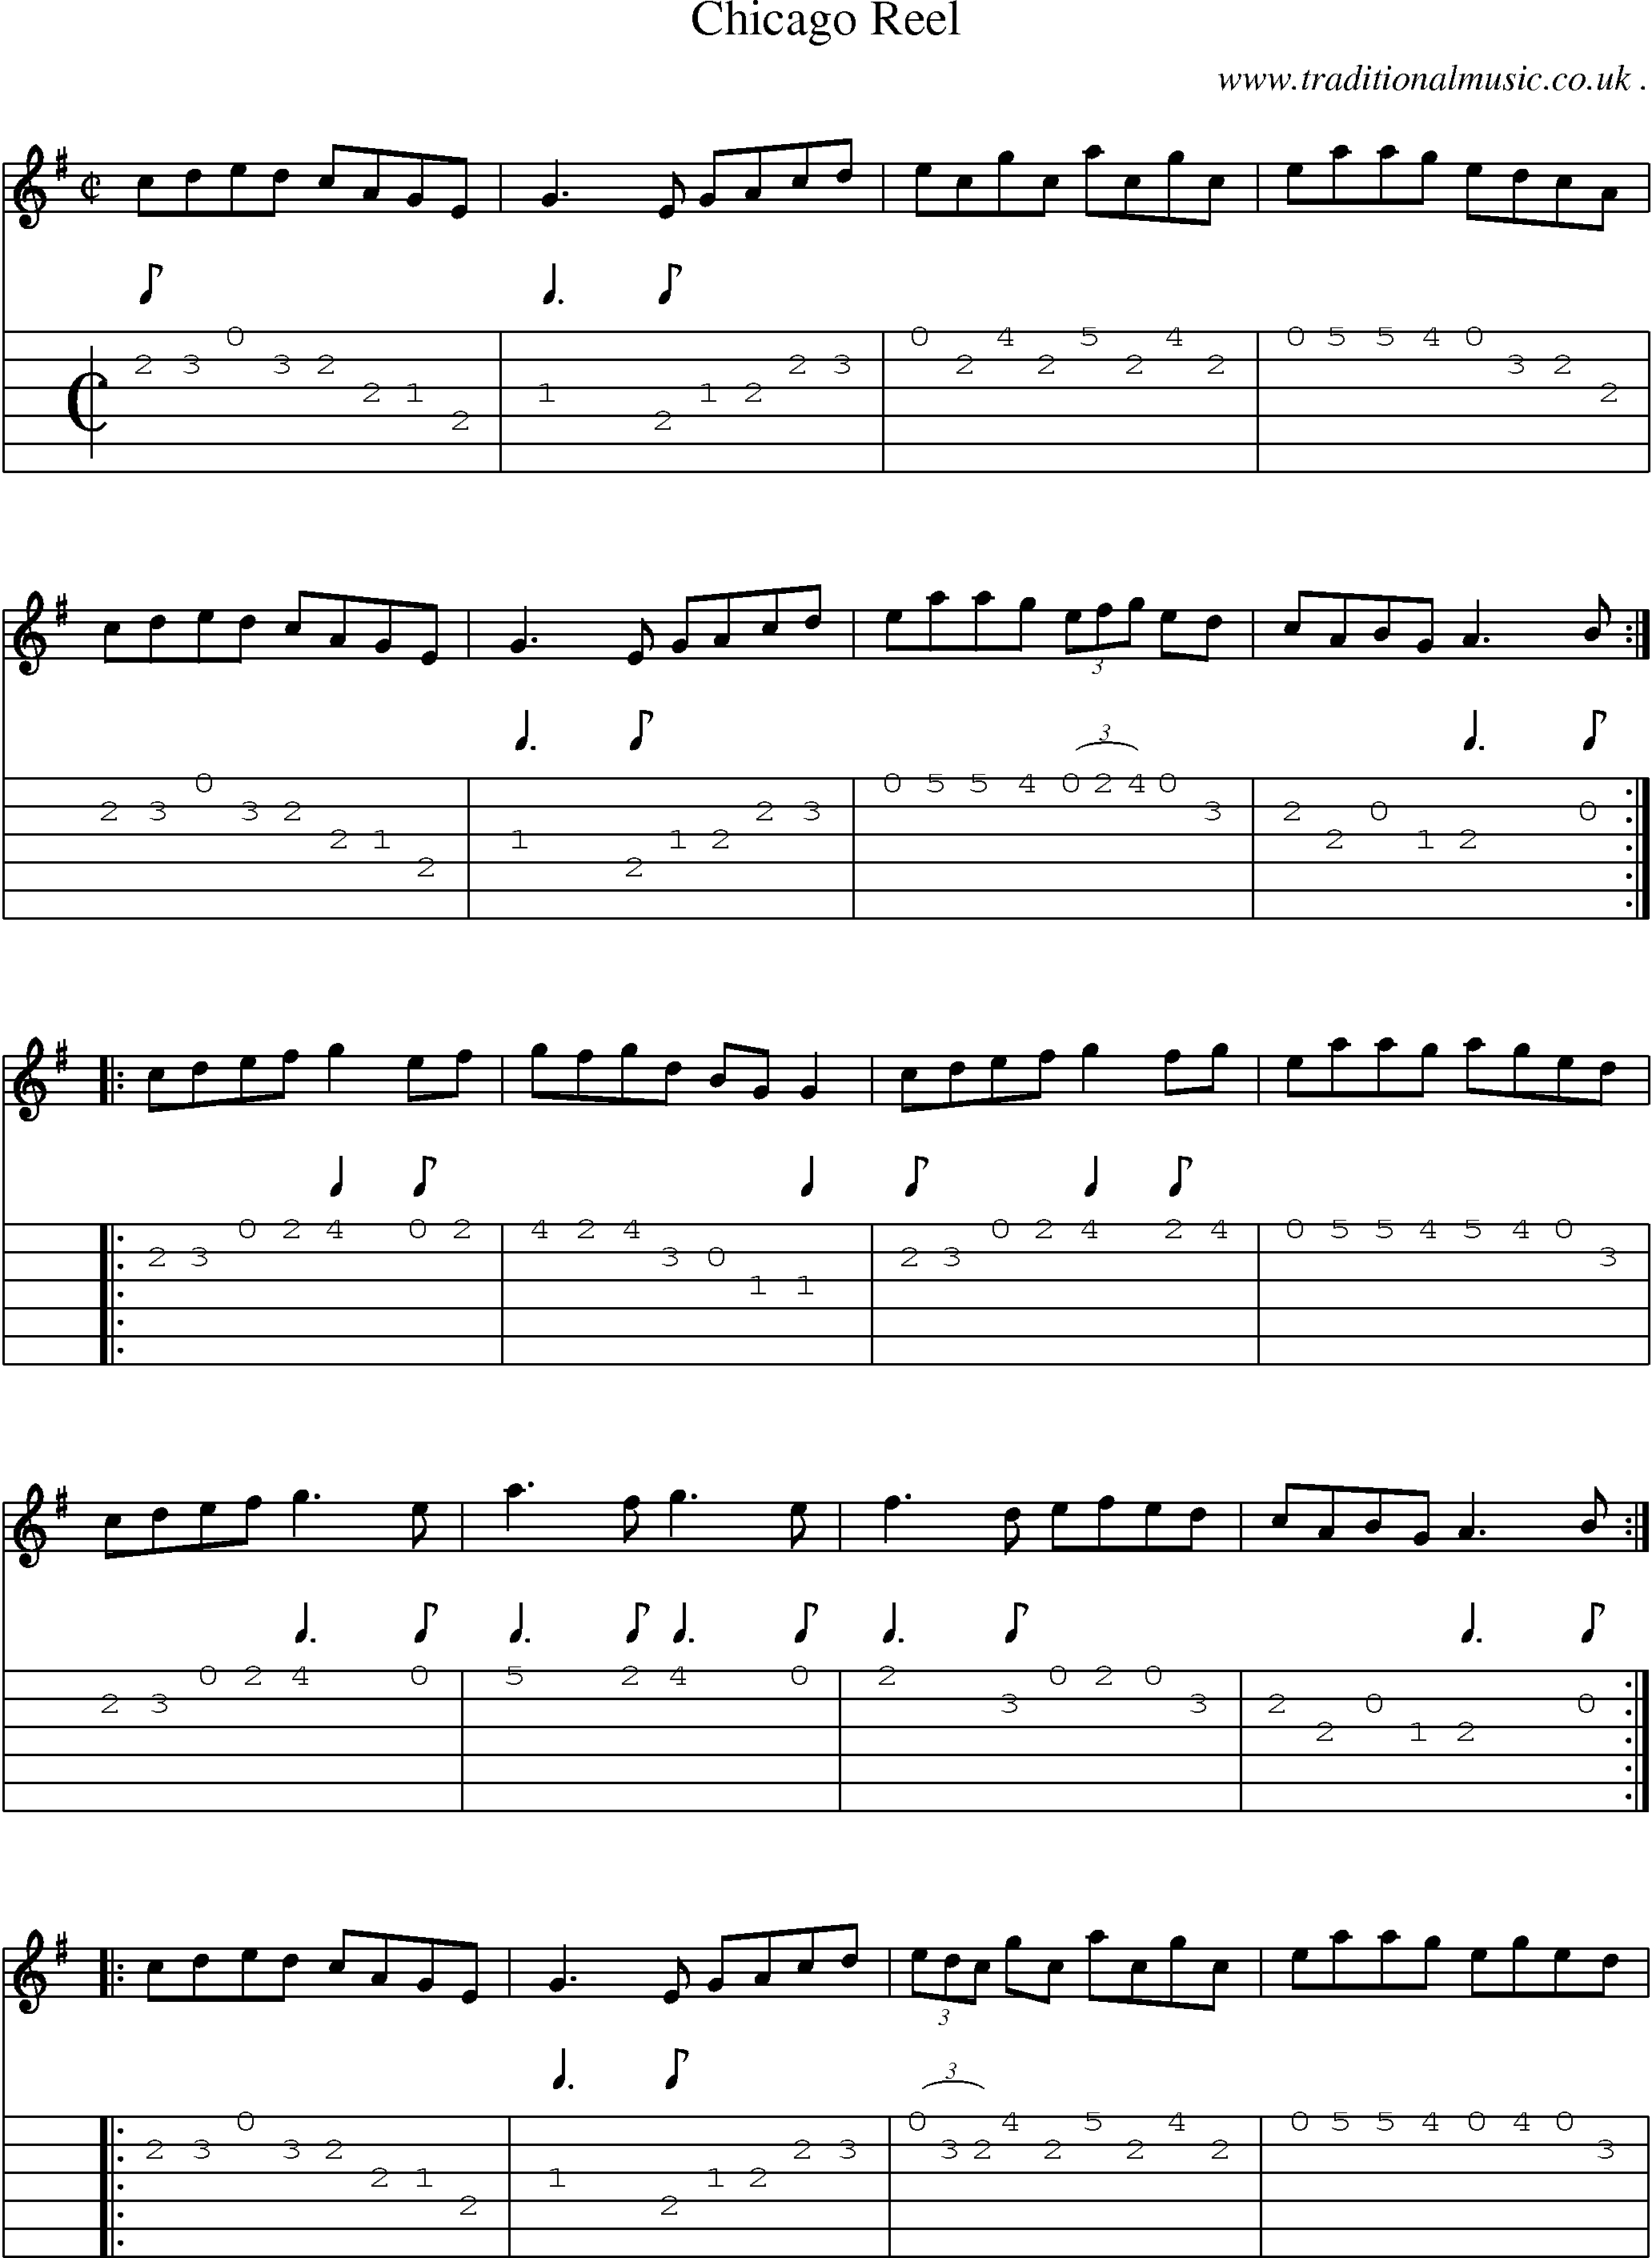 Sheet-Music and Guitar Tabs for Chicago Reel